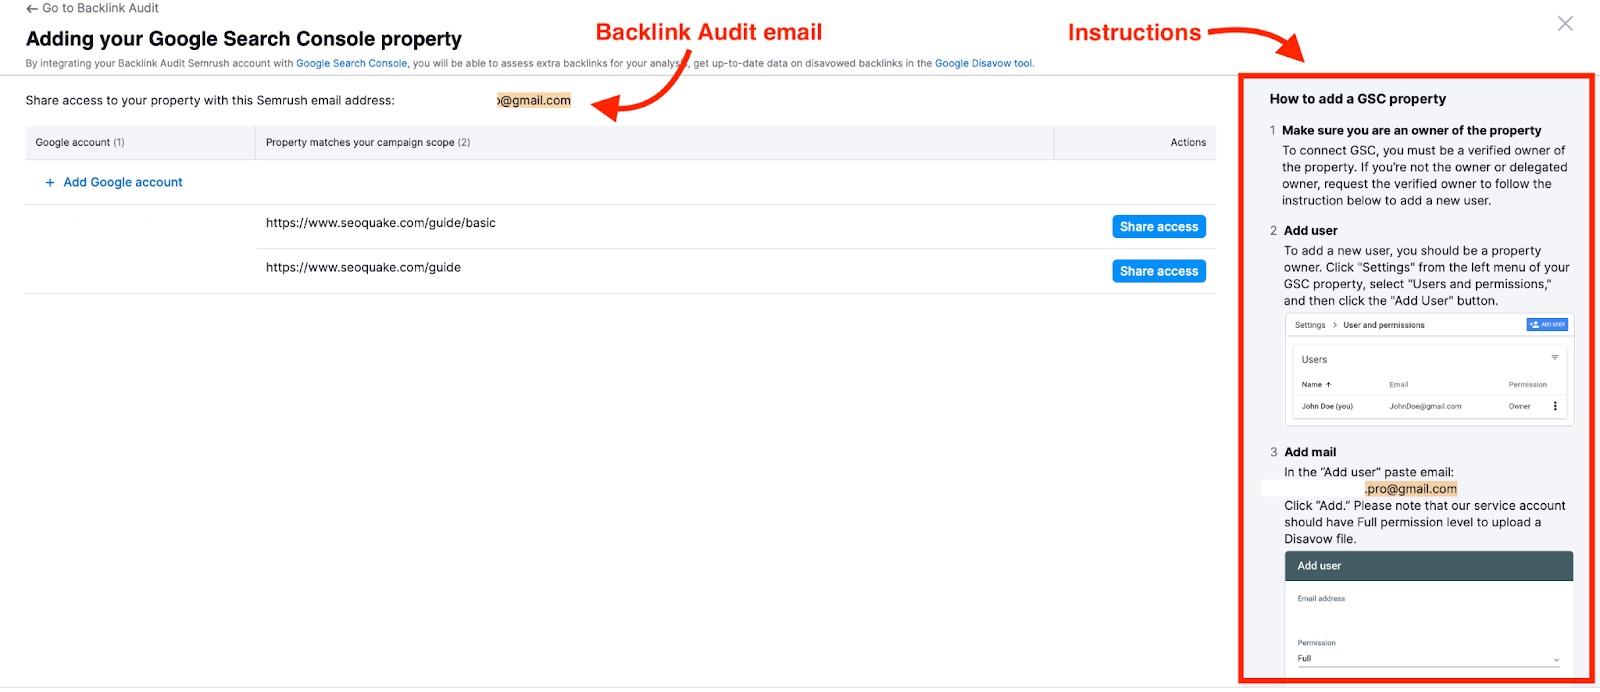 Connecting Backlink Audit to Google Accounts image 9